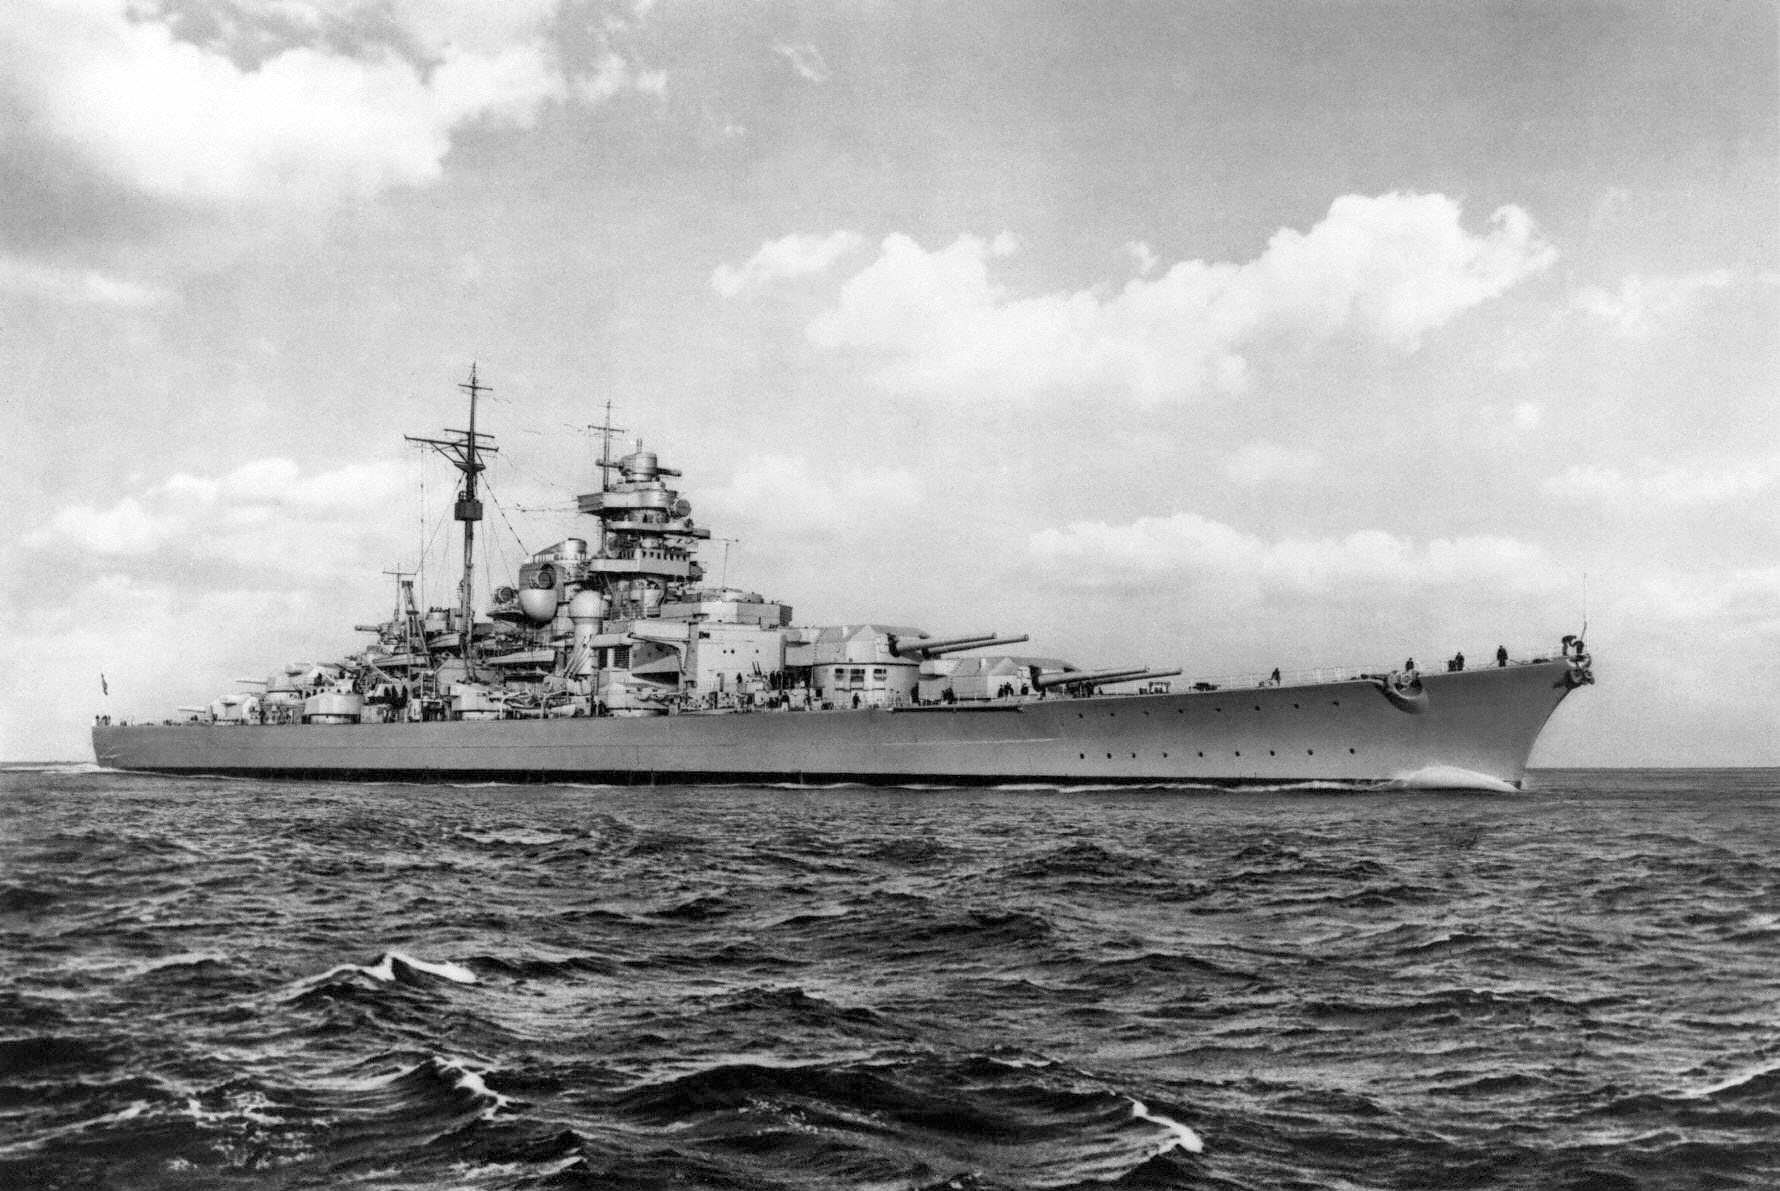 bismarck_during_sea_trials_after_being_completed_at_the_blohm_voss_shipyards_in_hamburg_in_1941_credit_photo_12_alamy_stock_photo.jpg